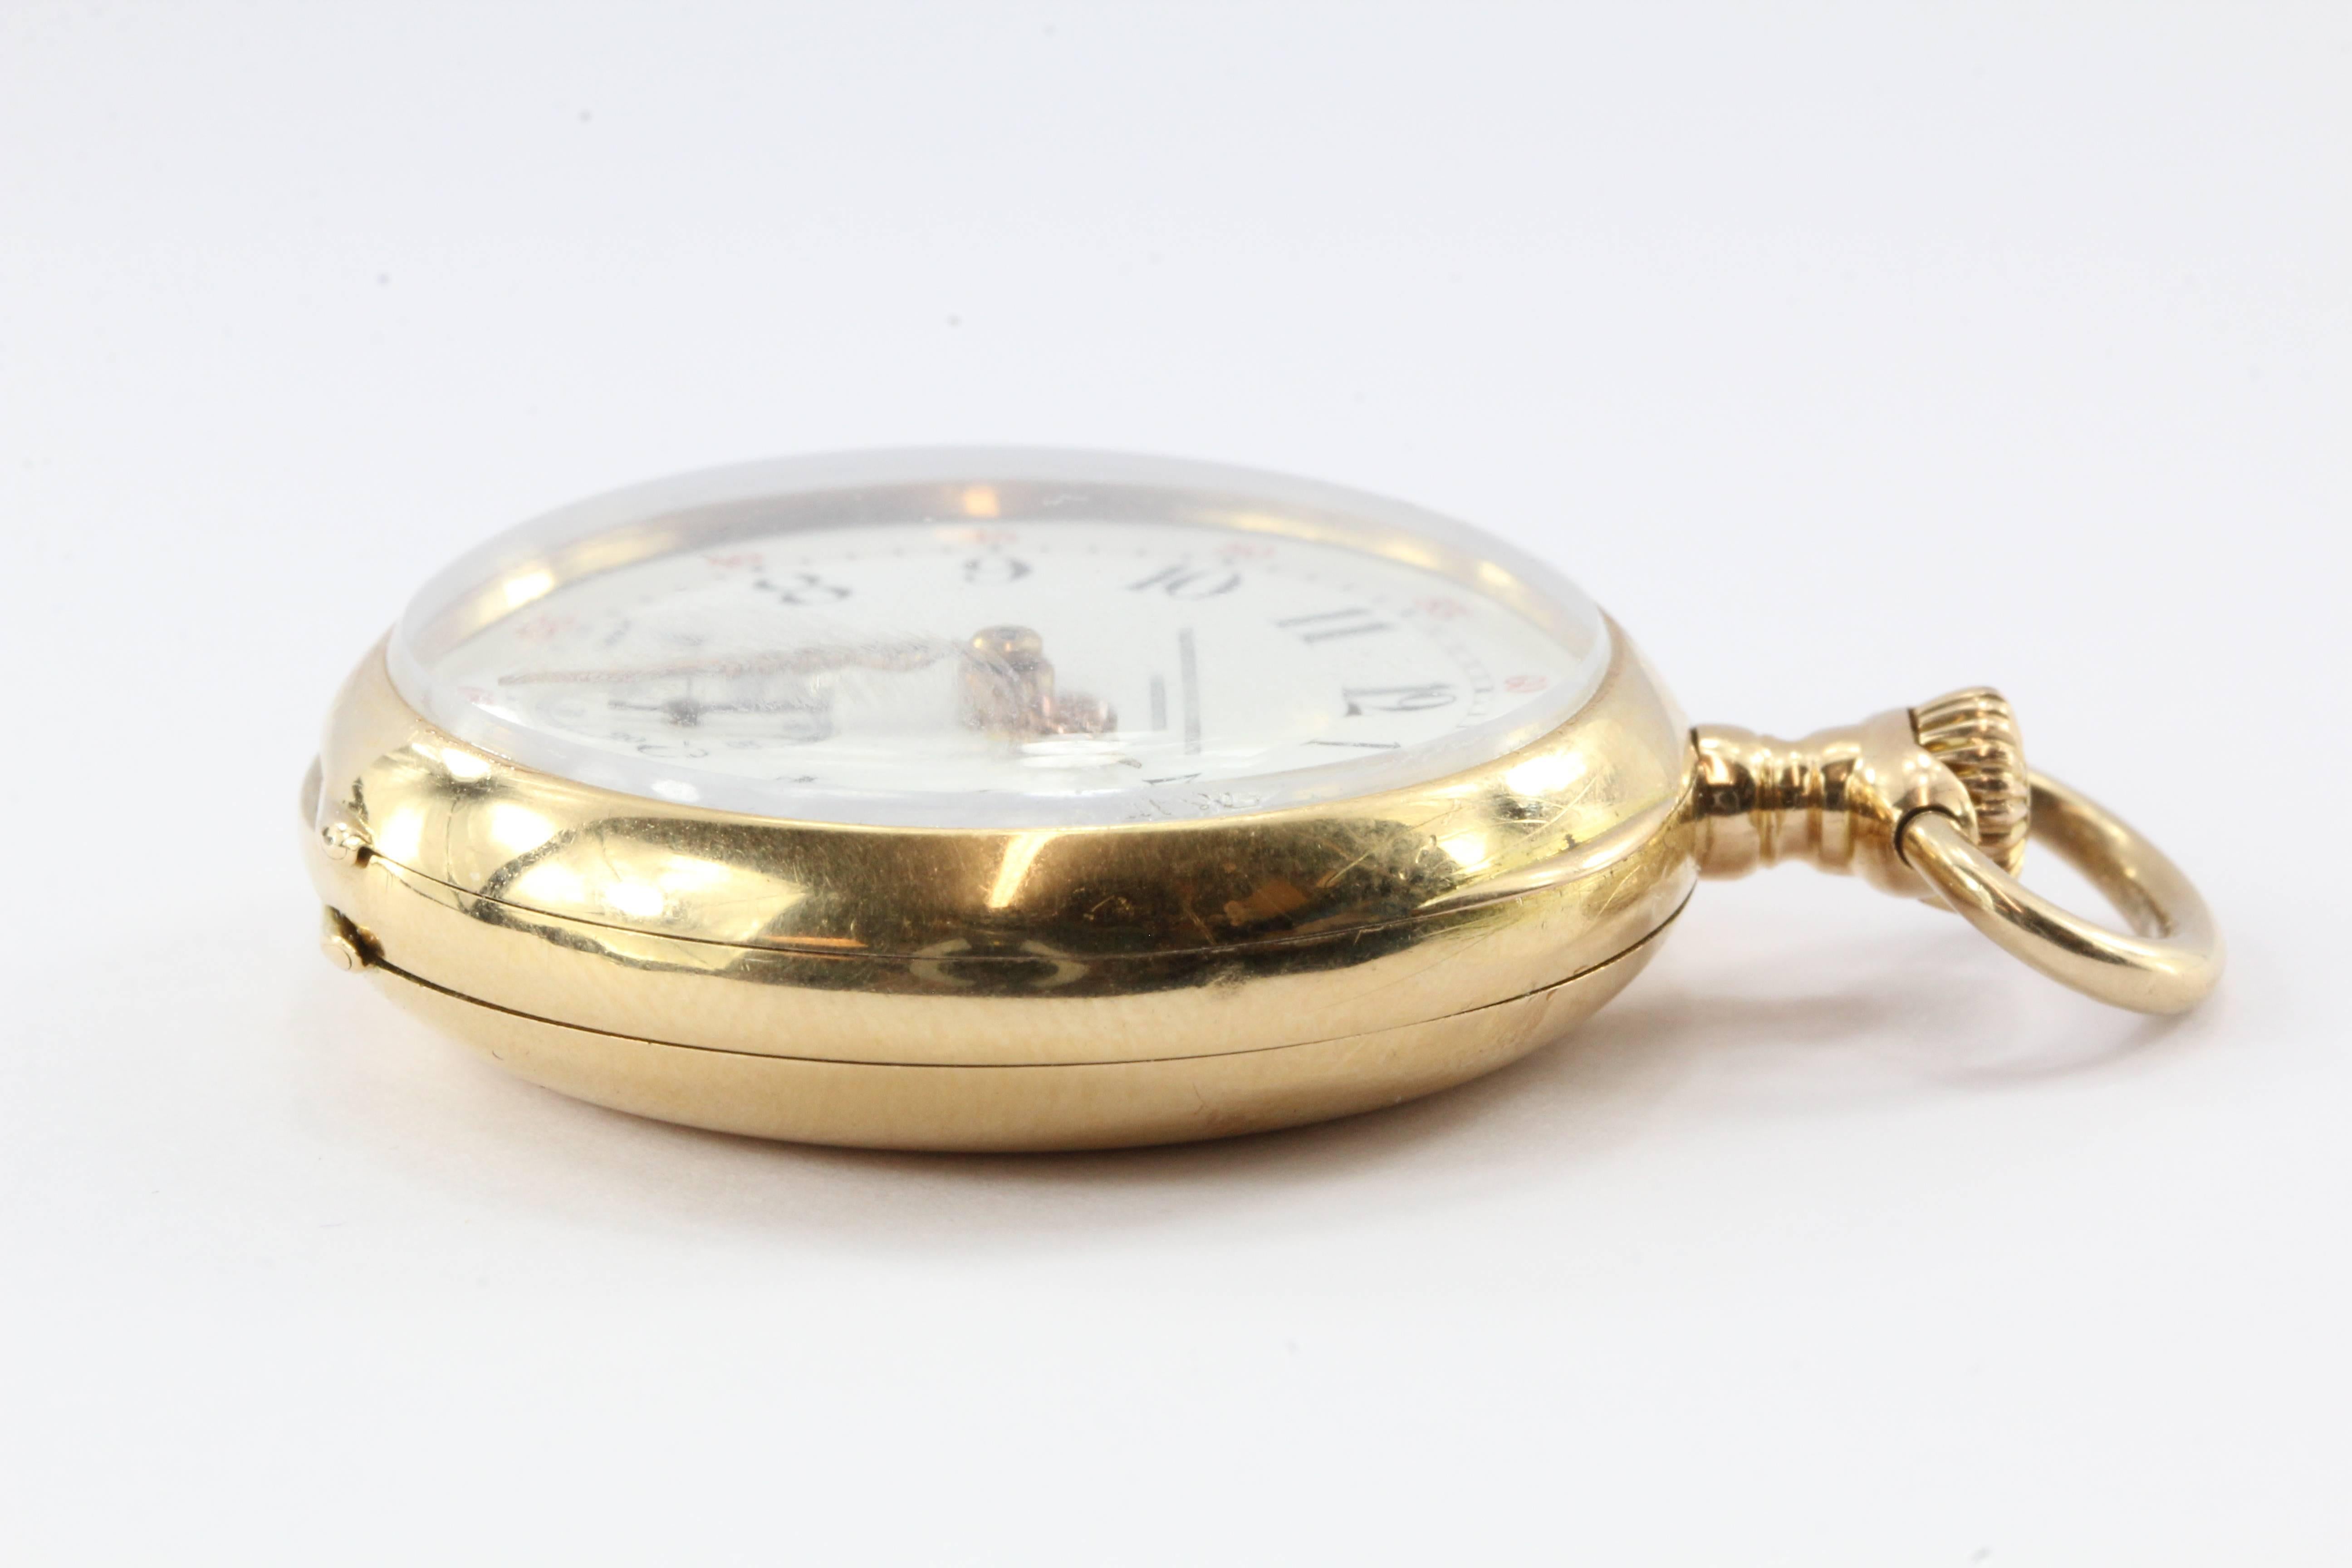 old operative's pocket watch